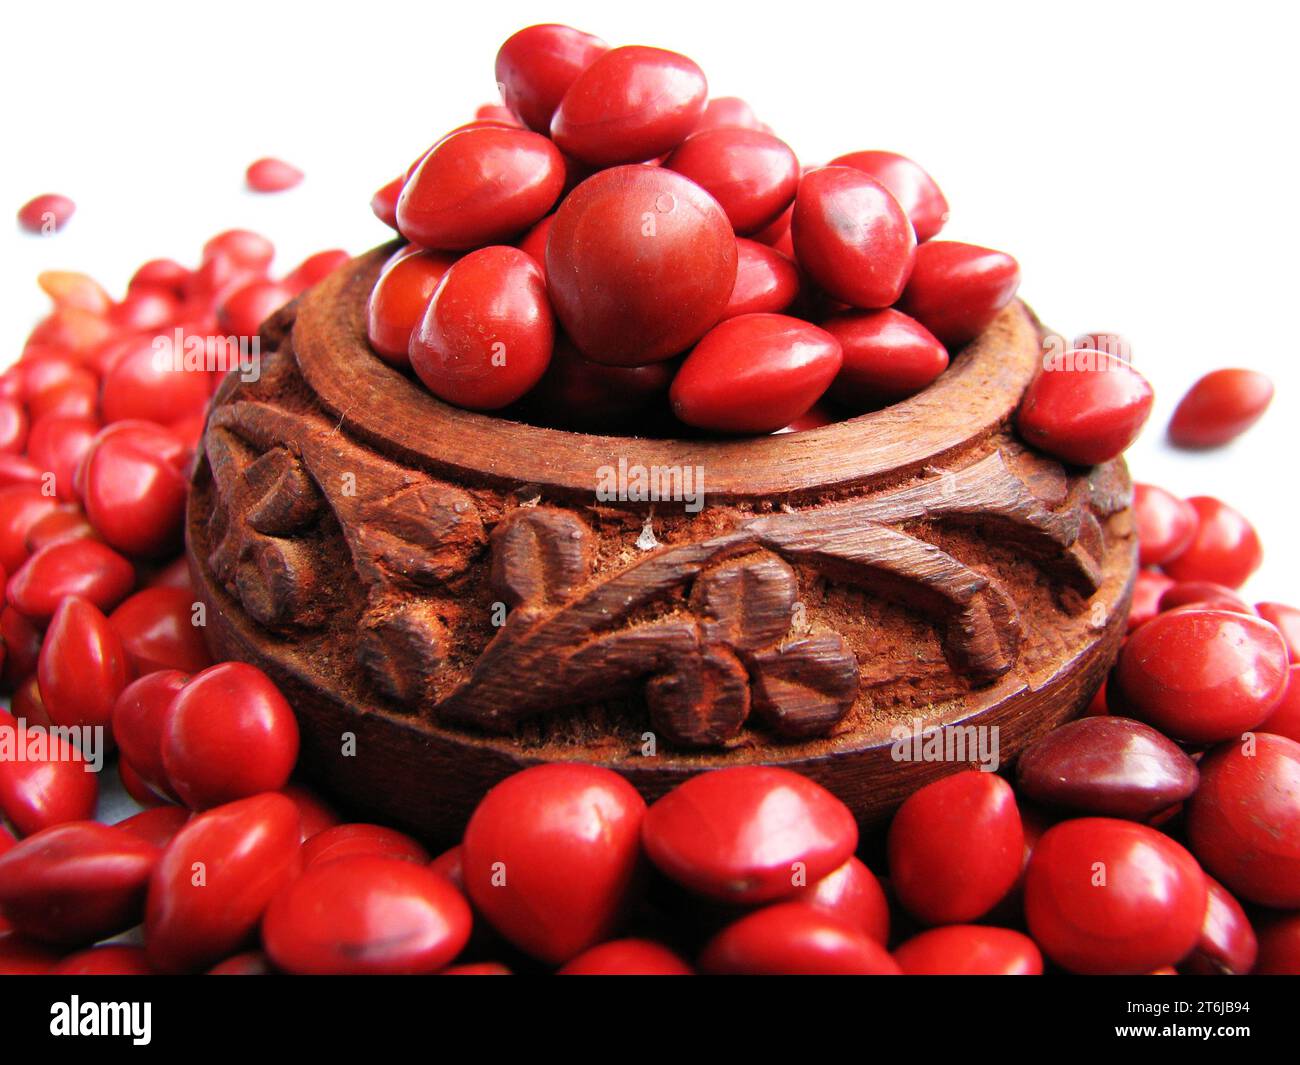 Red bead tree seeds scattered from crimson wooden shell. Stock Photo